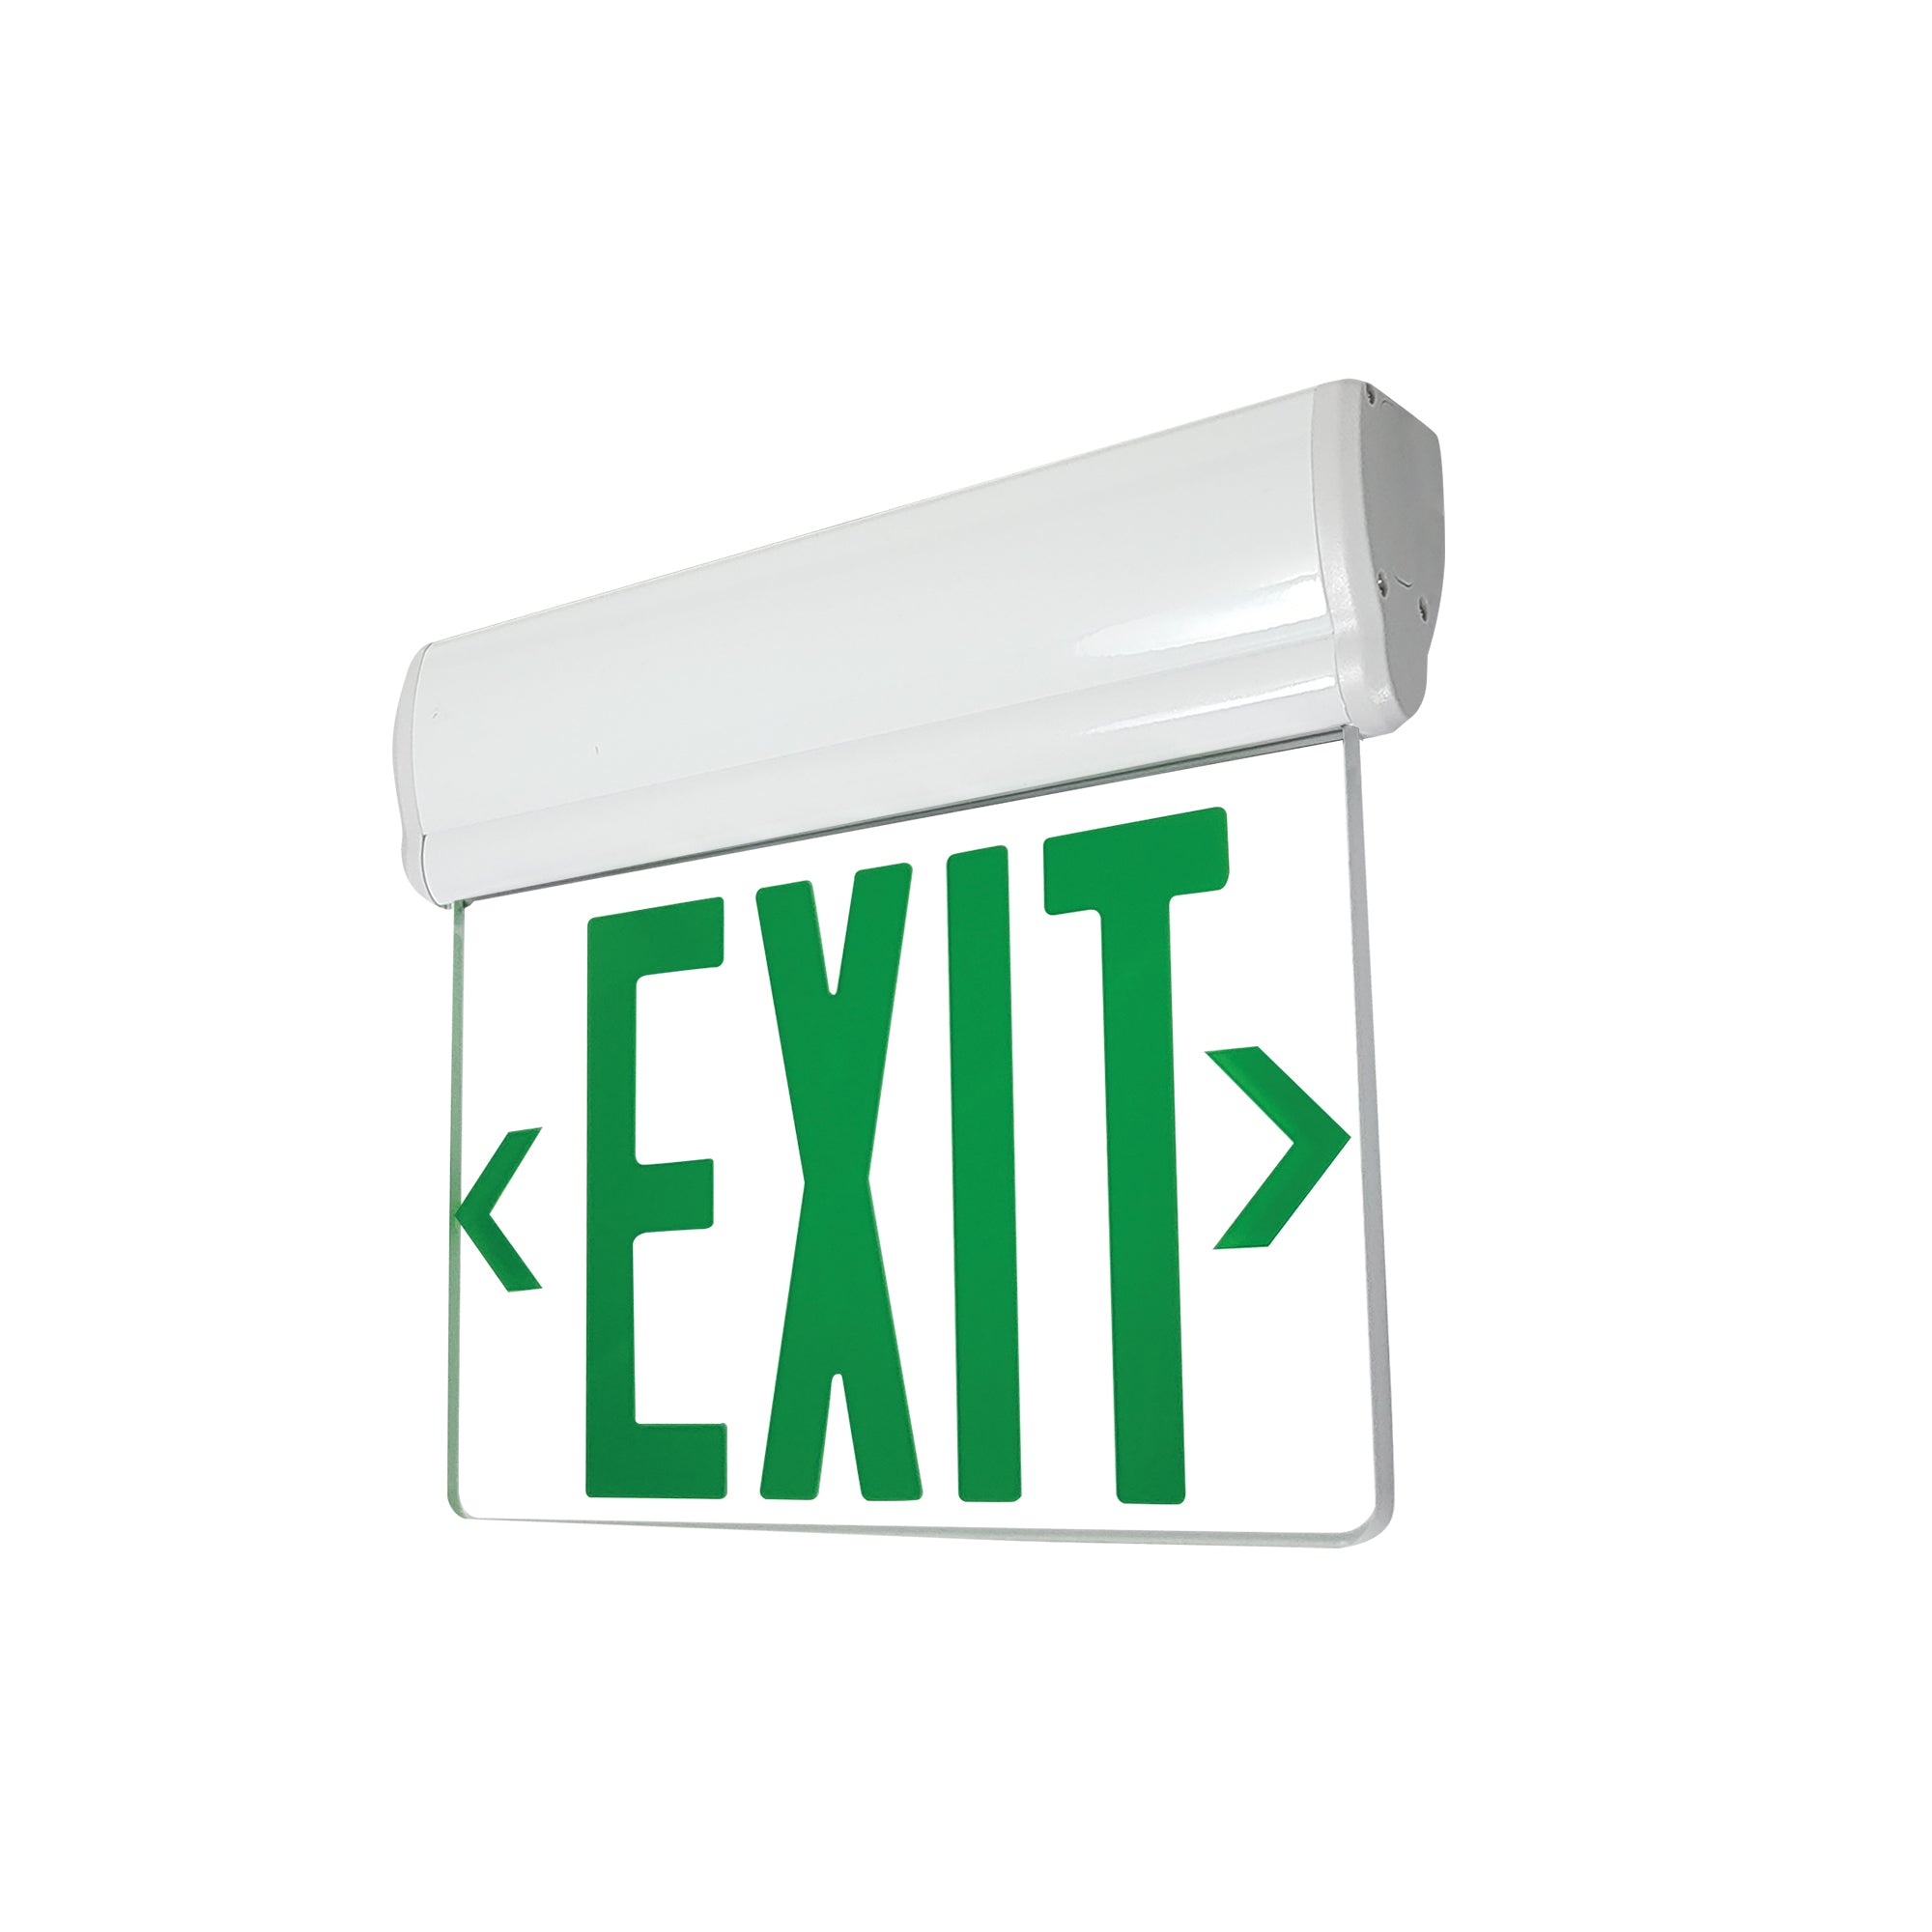 Nora Lighting NX-812-LEDGCW - Exit / Emergency - Surface Adjustable LED Edge-Lit Exit Sign, Battery Backup, 6 Inch Green Letters, Single Face / Clear Acrylic, White Housing